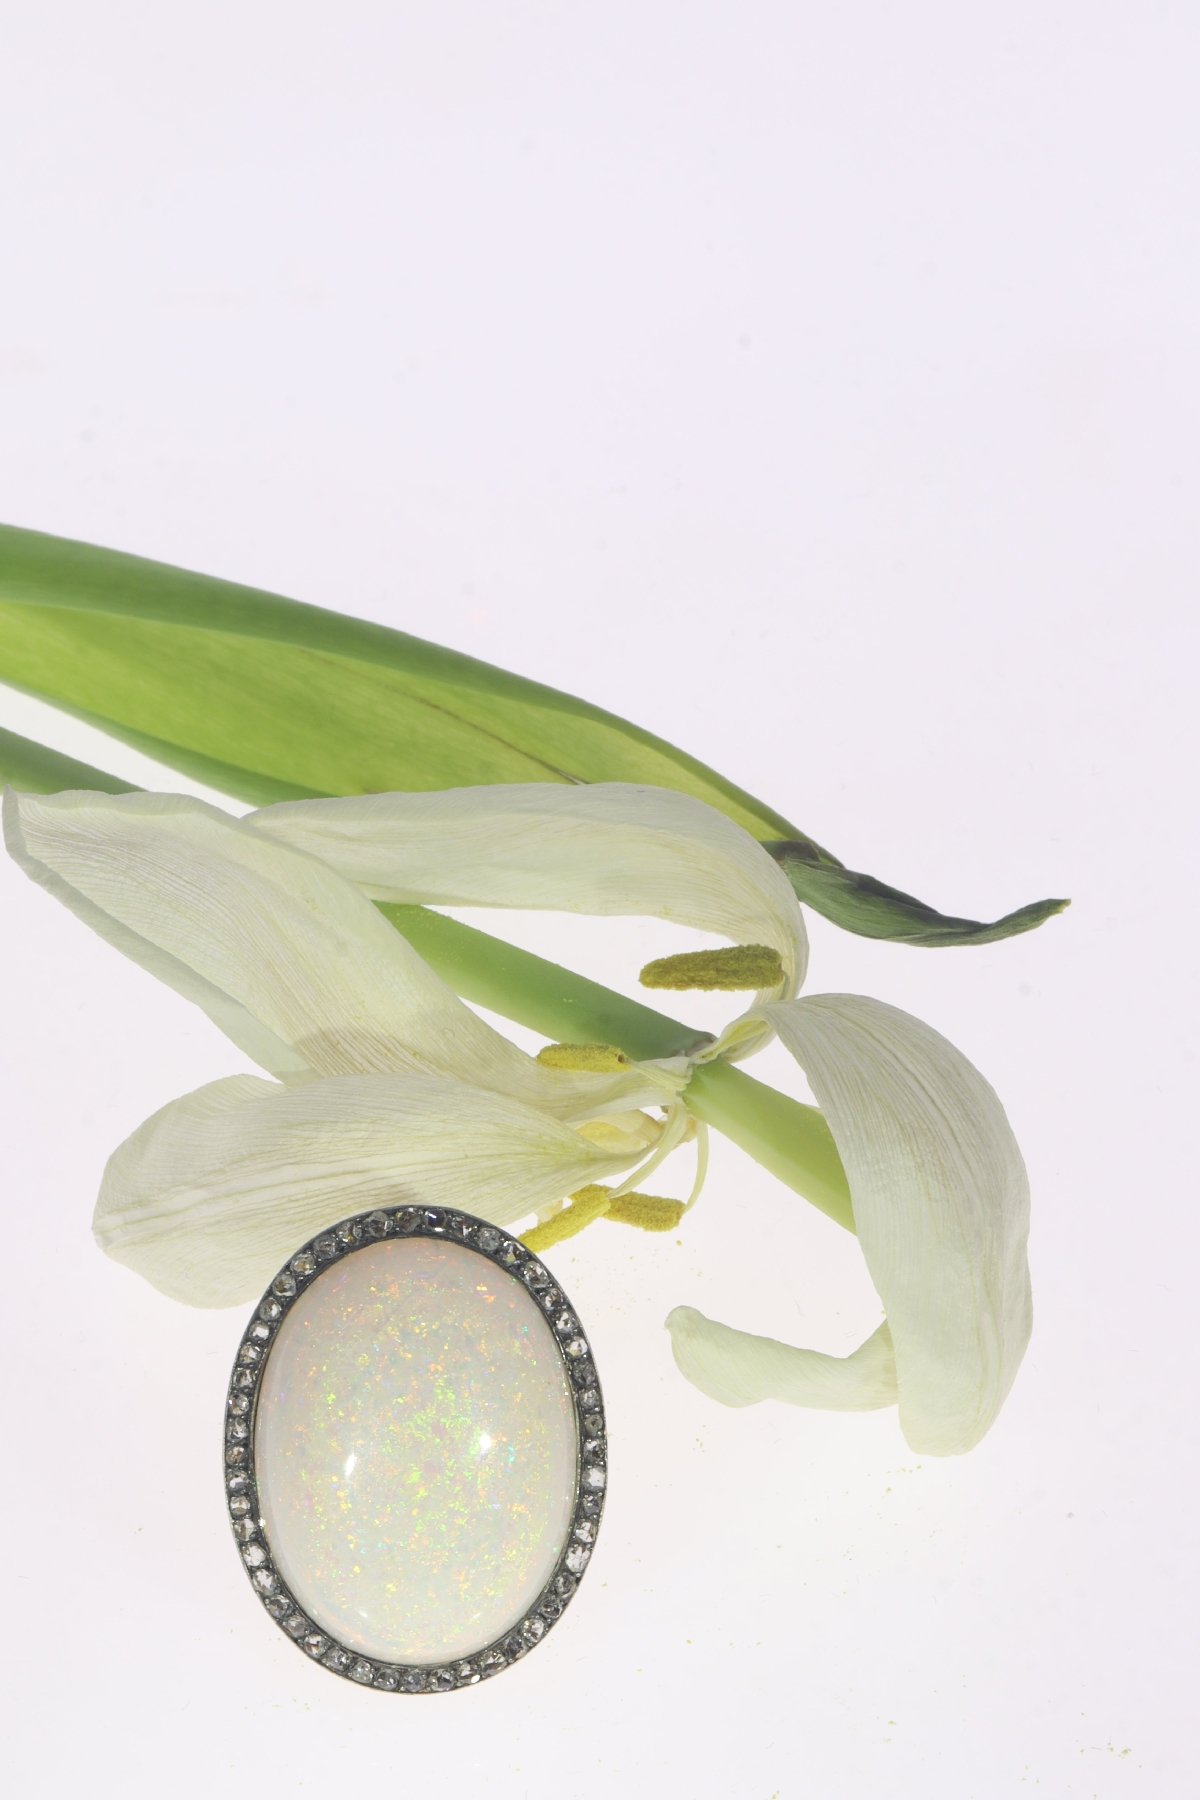 Click the picture to see more of this Vintage gold ring with humongous 30+ carat high quality opal and 56 rose cut diamonds